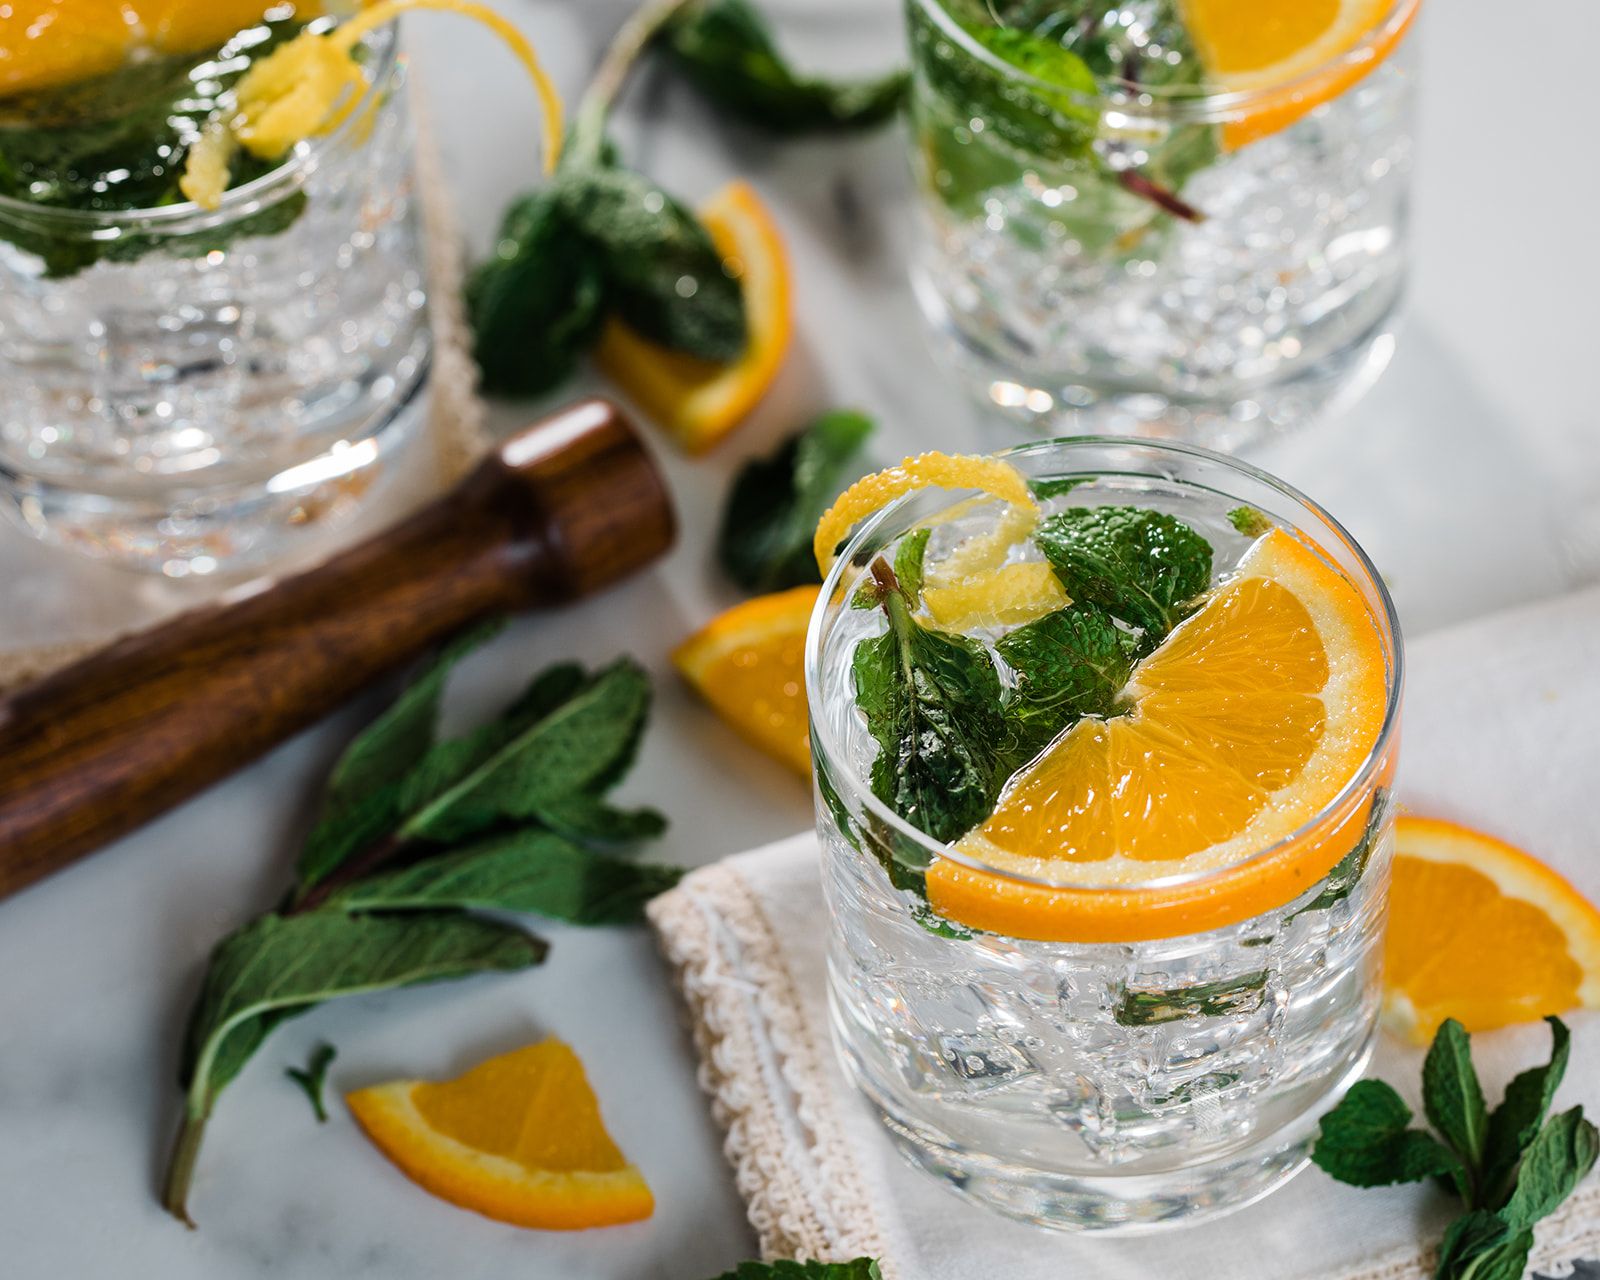 Clear alcoholic seltzer beverage with muddled mint and an orange slice.